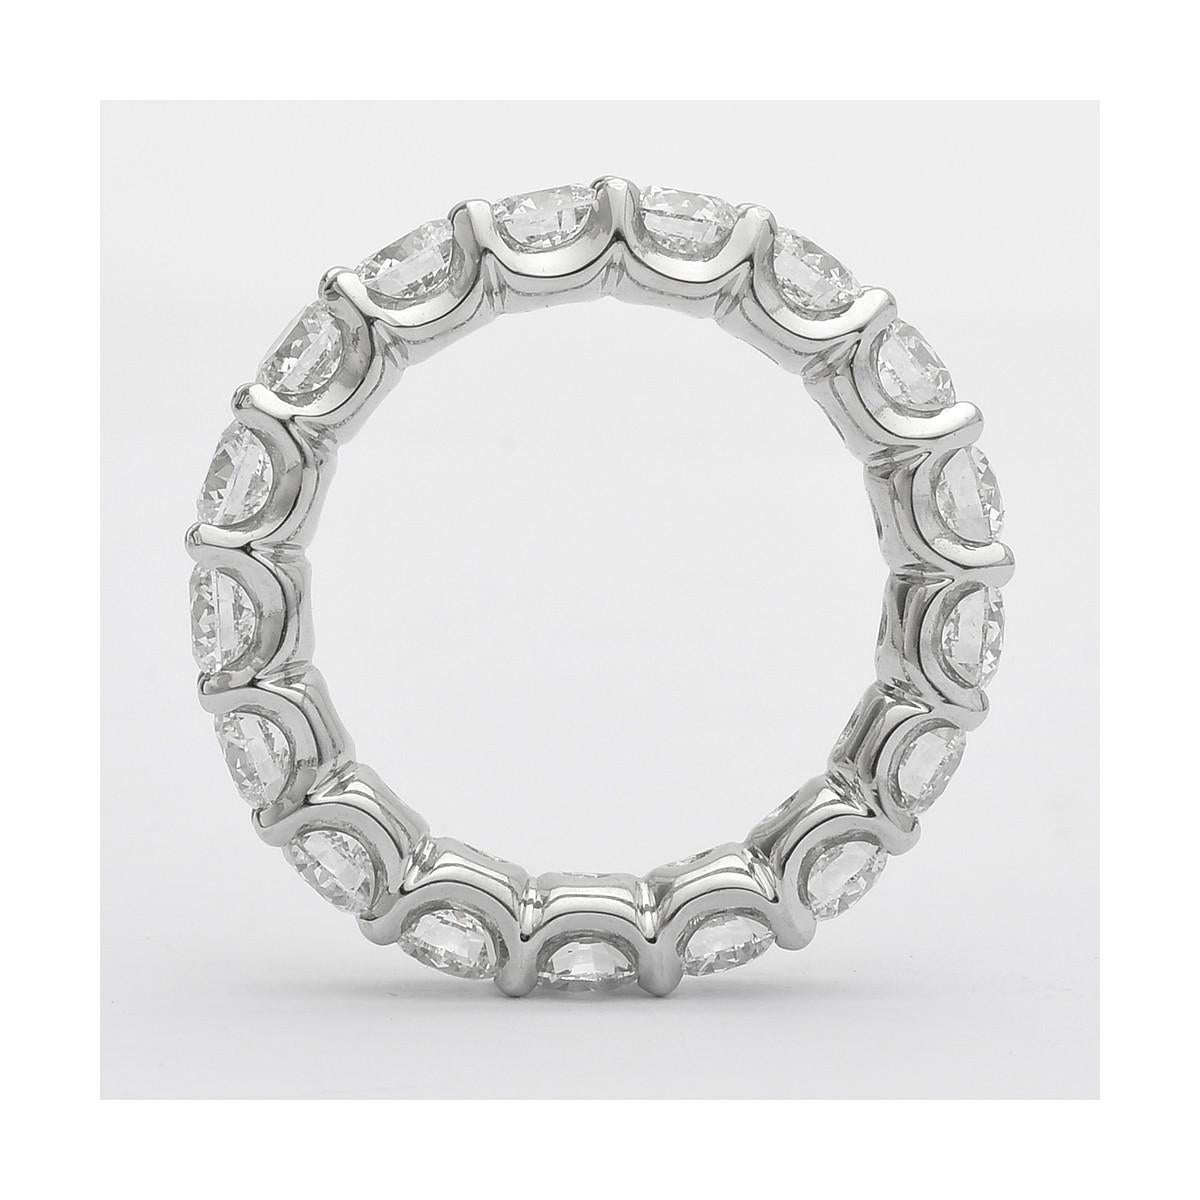 Diamond eternity band ring, showcasing fine near-colorless round brilliant-cut diamonds prong-set in a platinum mounting with a 'U'-shaped sculpted-edge.

Sixteen diamonds weighing 3.69 total carats (G-color and VS2 clarity, or better)
Designed by